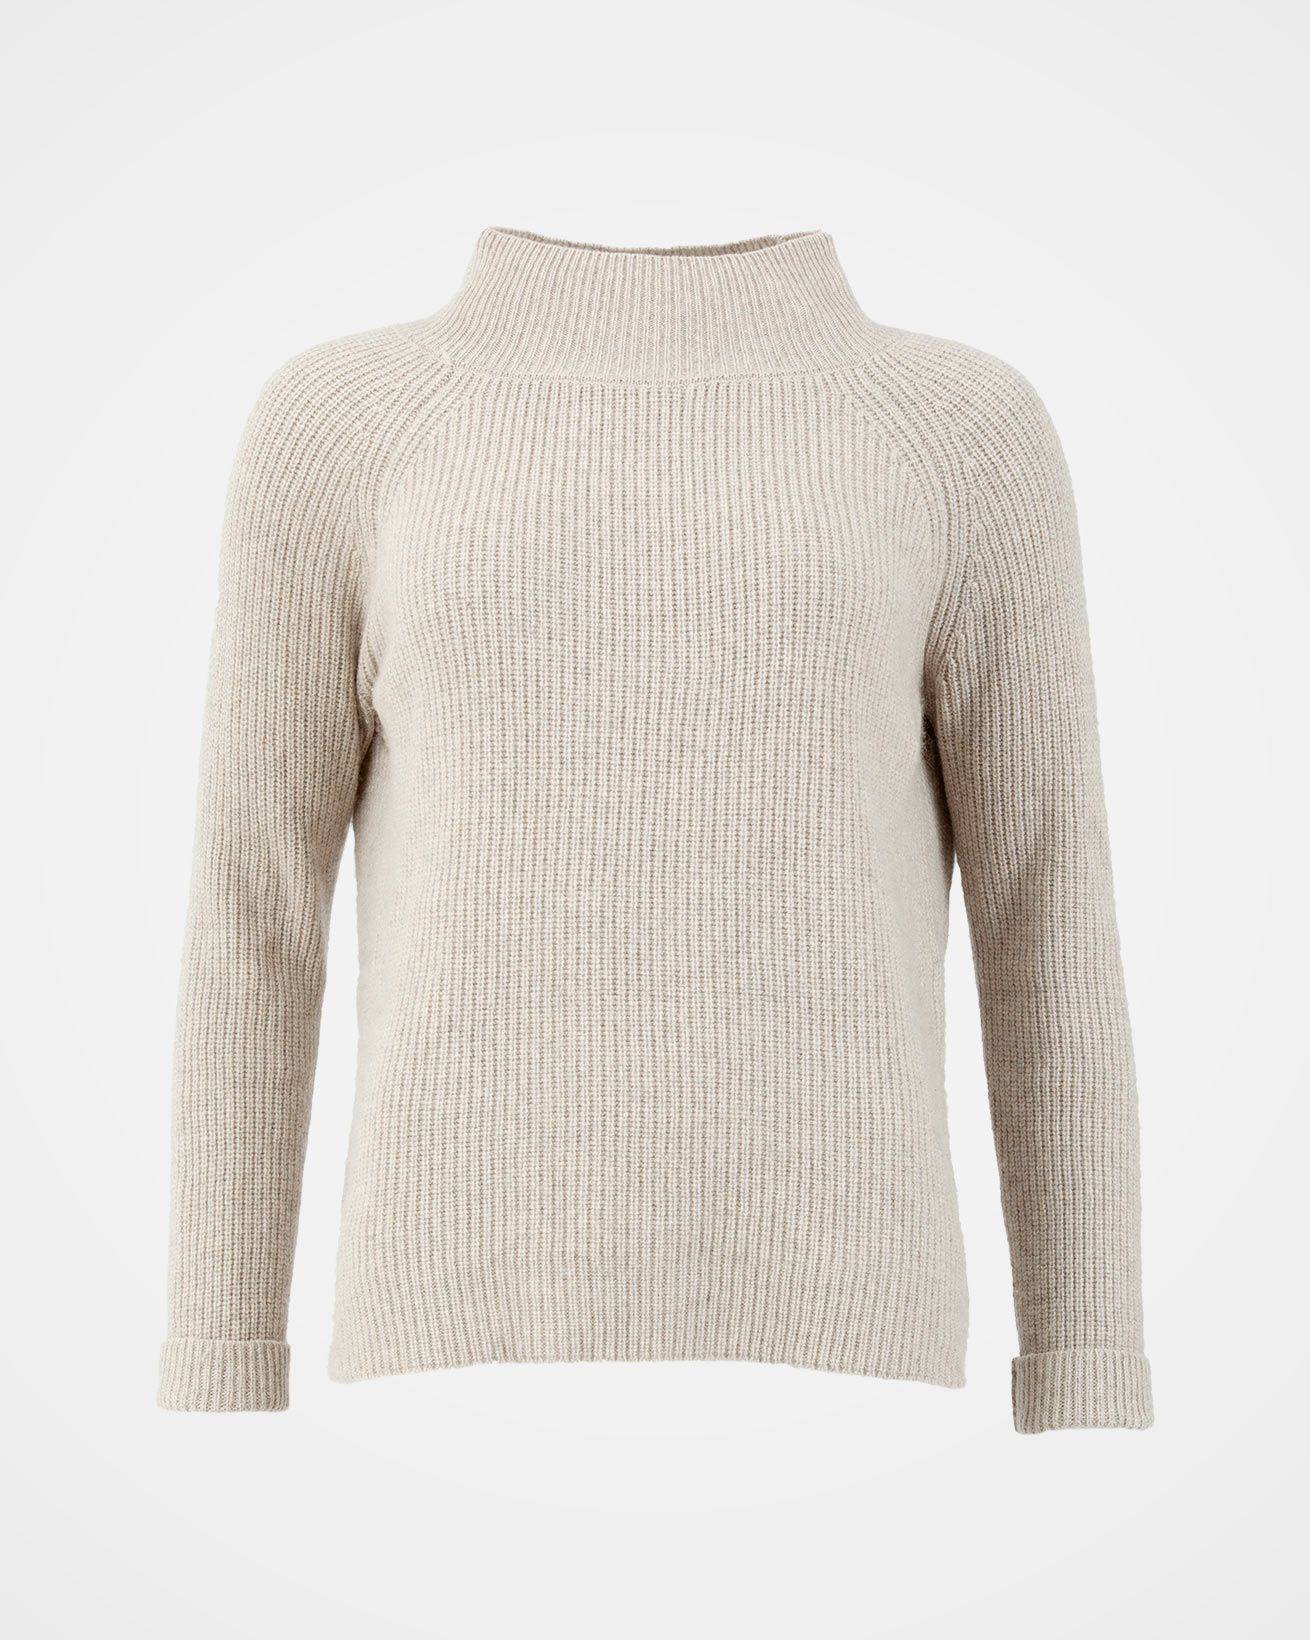 7608_eco-luxe-cashmere-jumper_oatmeal_front.jpg